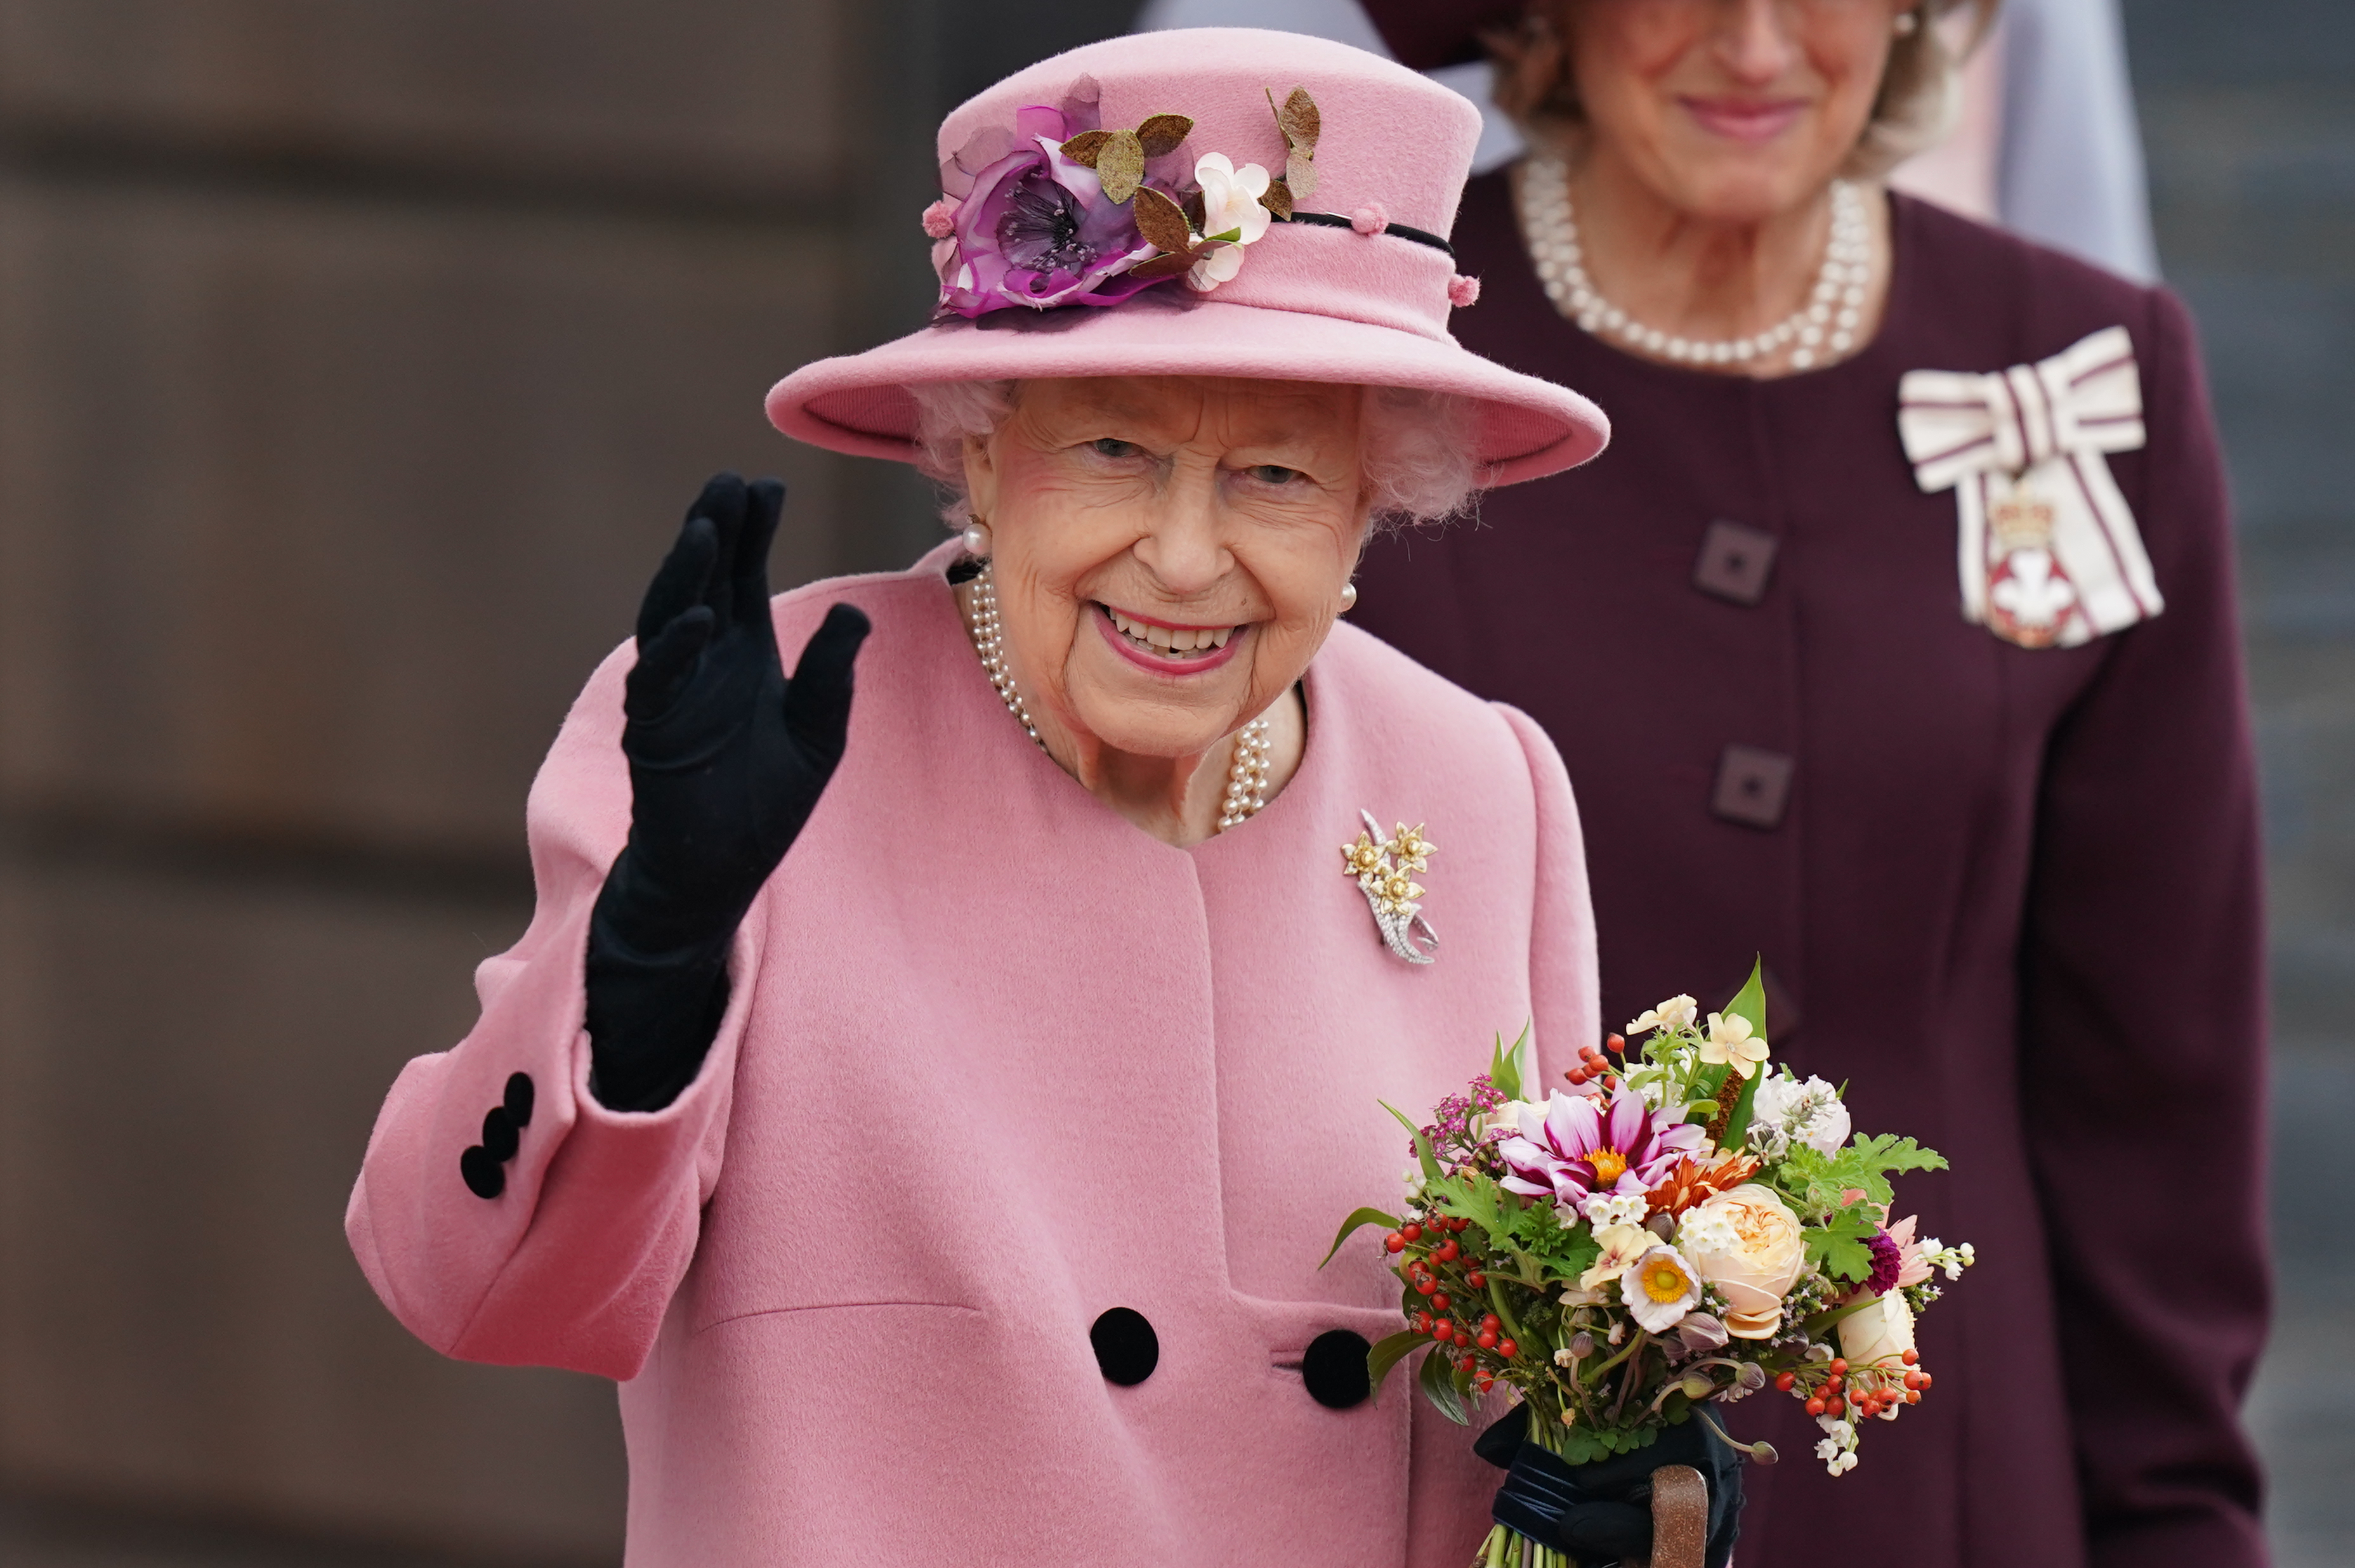 Her Majesty The Queen. Photo credit: Jacob King/PA Wire/PA Images.